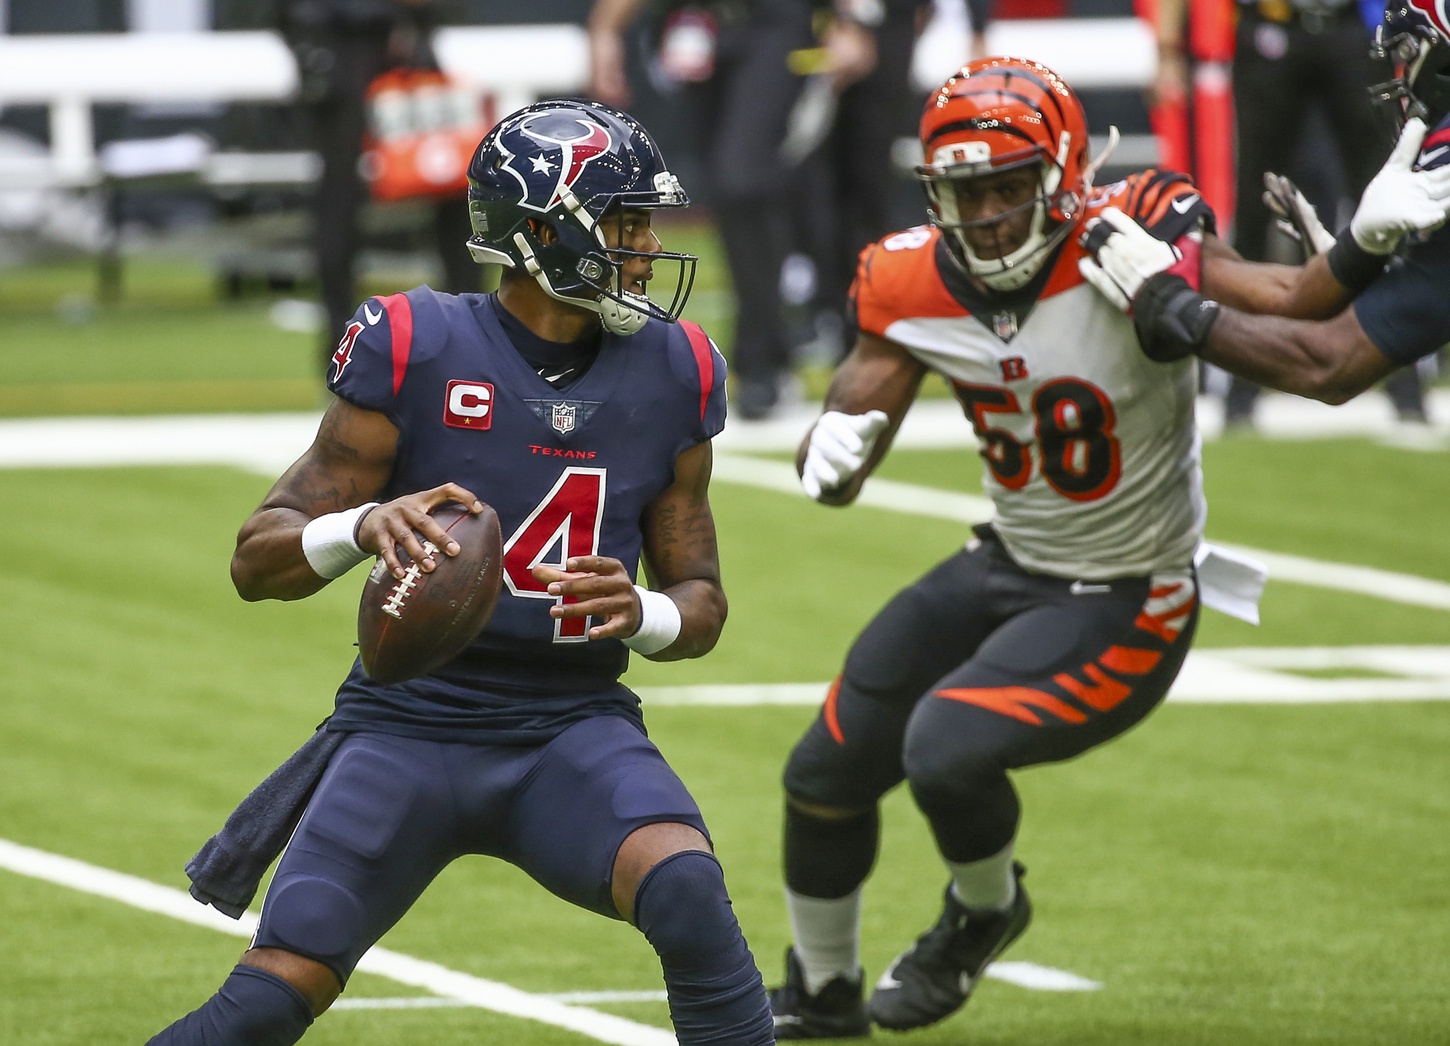 Ottewill: The Broncos win over the Texans is only a W in the standings